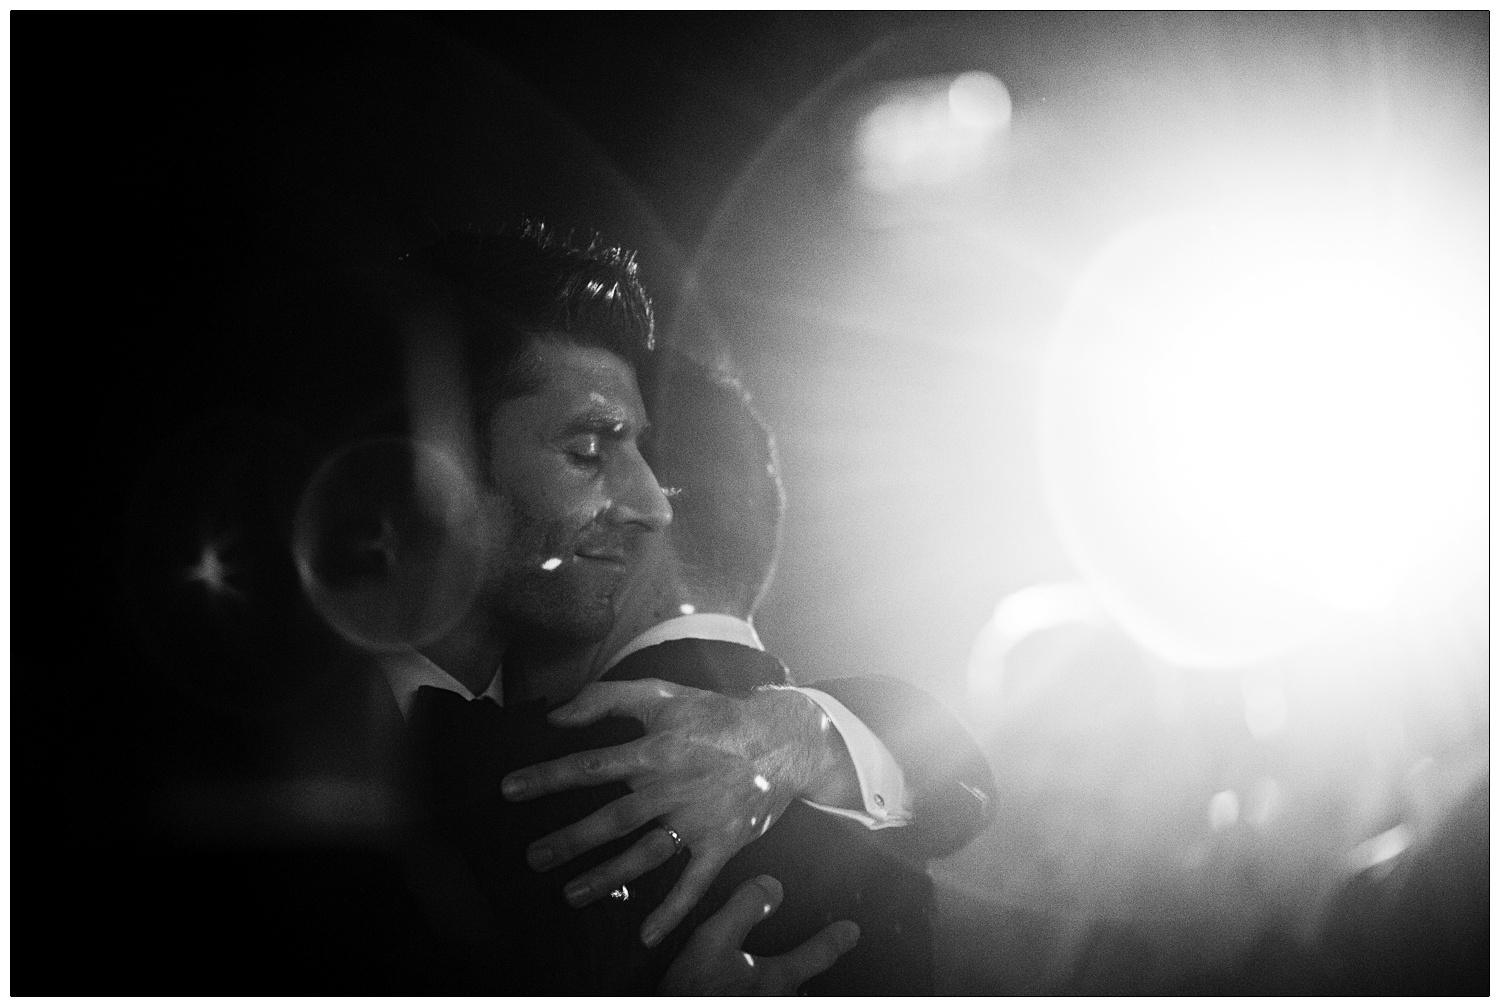 The grooms hugging each other during the first dance. The light is flaring behind them.